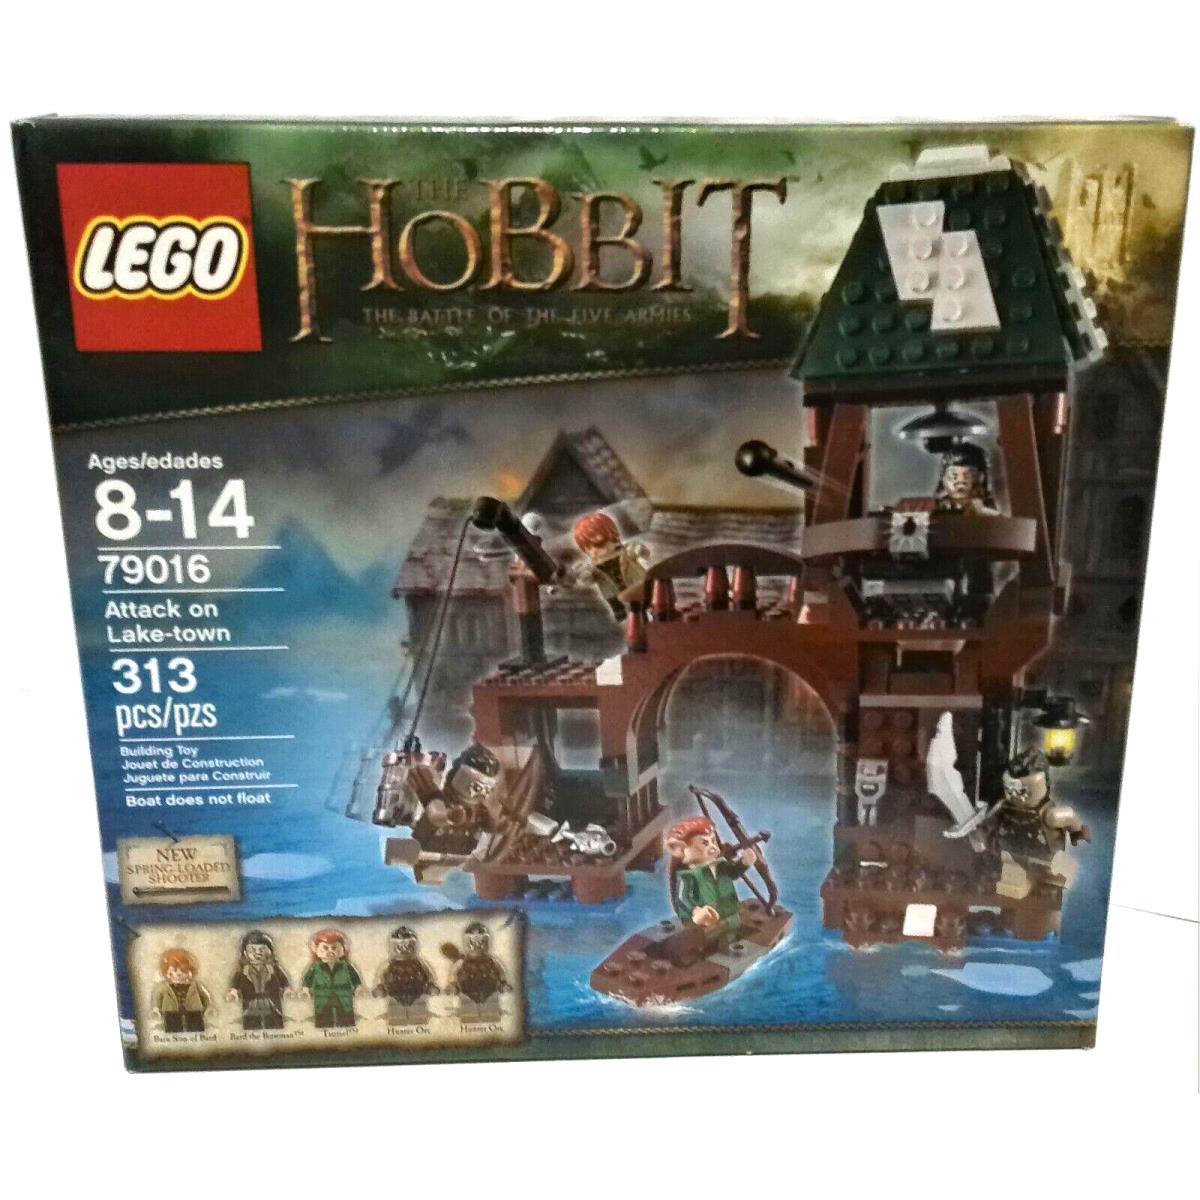 Lego The Hobbit The Battle OF The Five Armies: 79016 Attack ON Lake-town Retired Misb